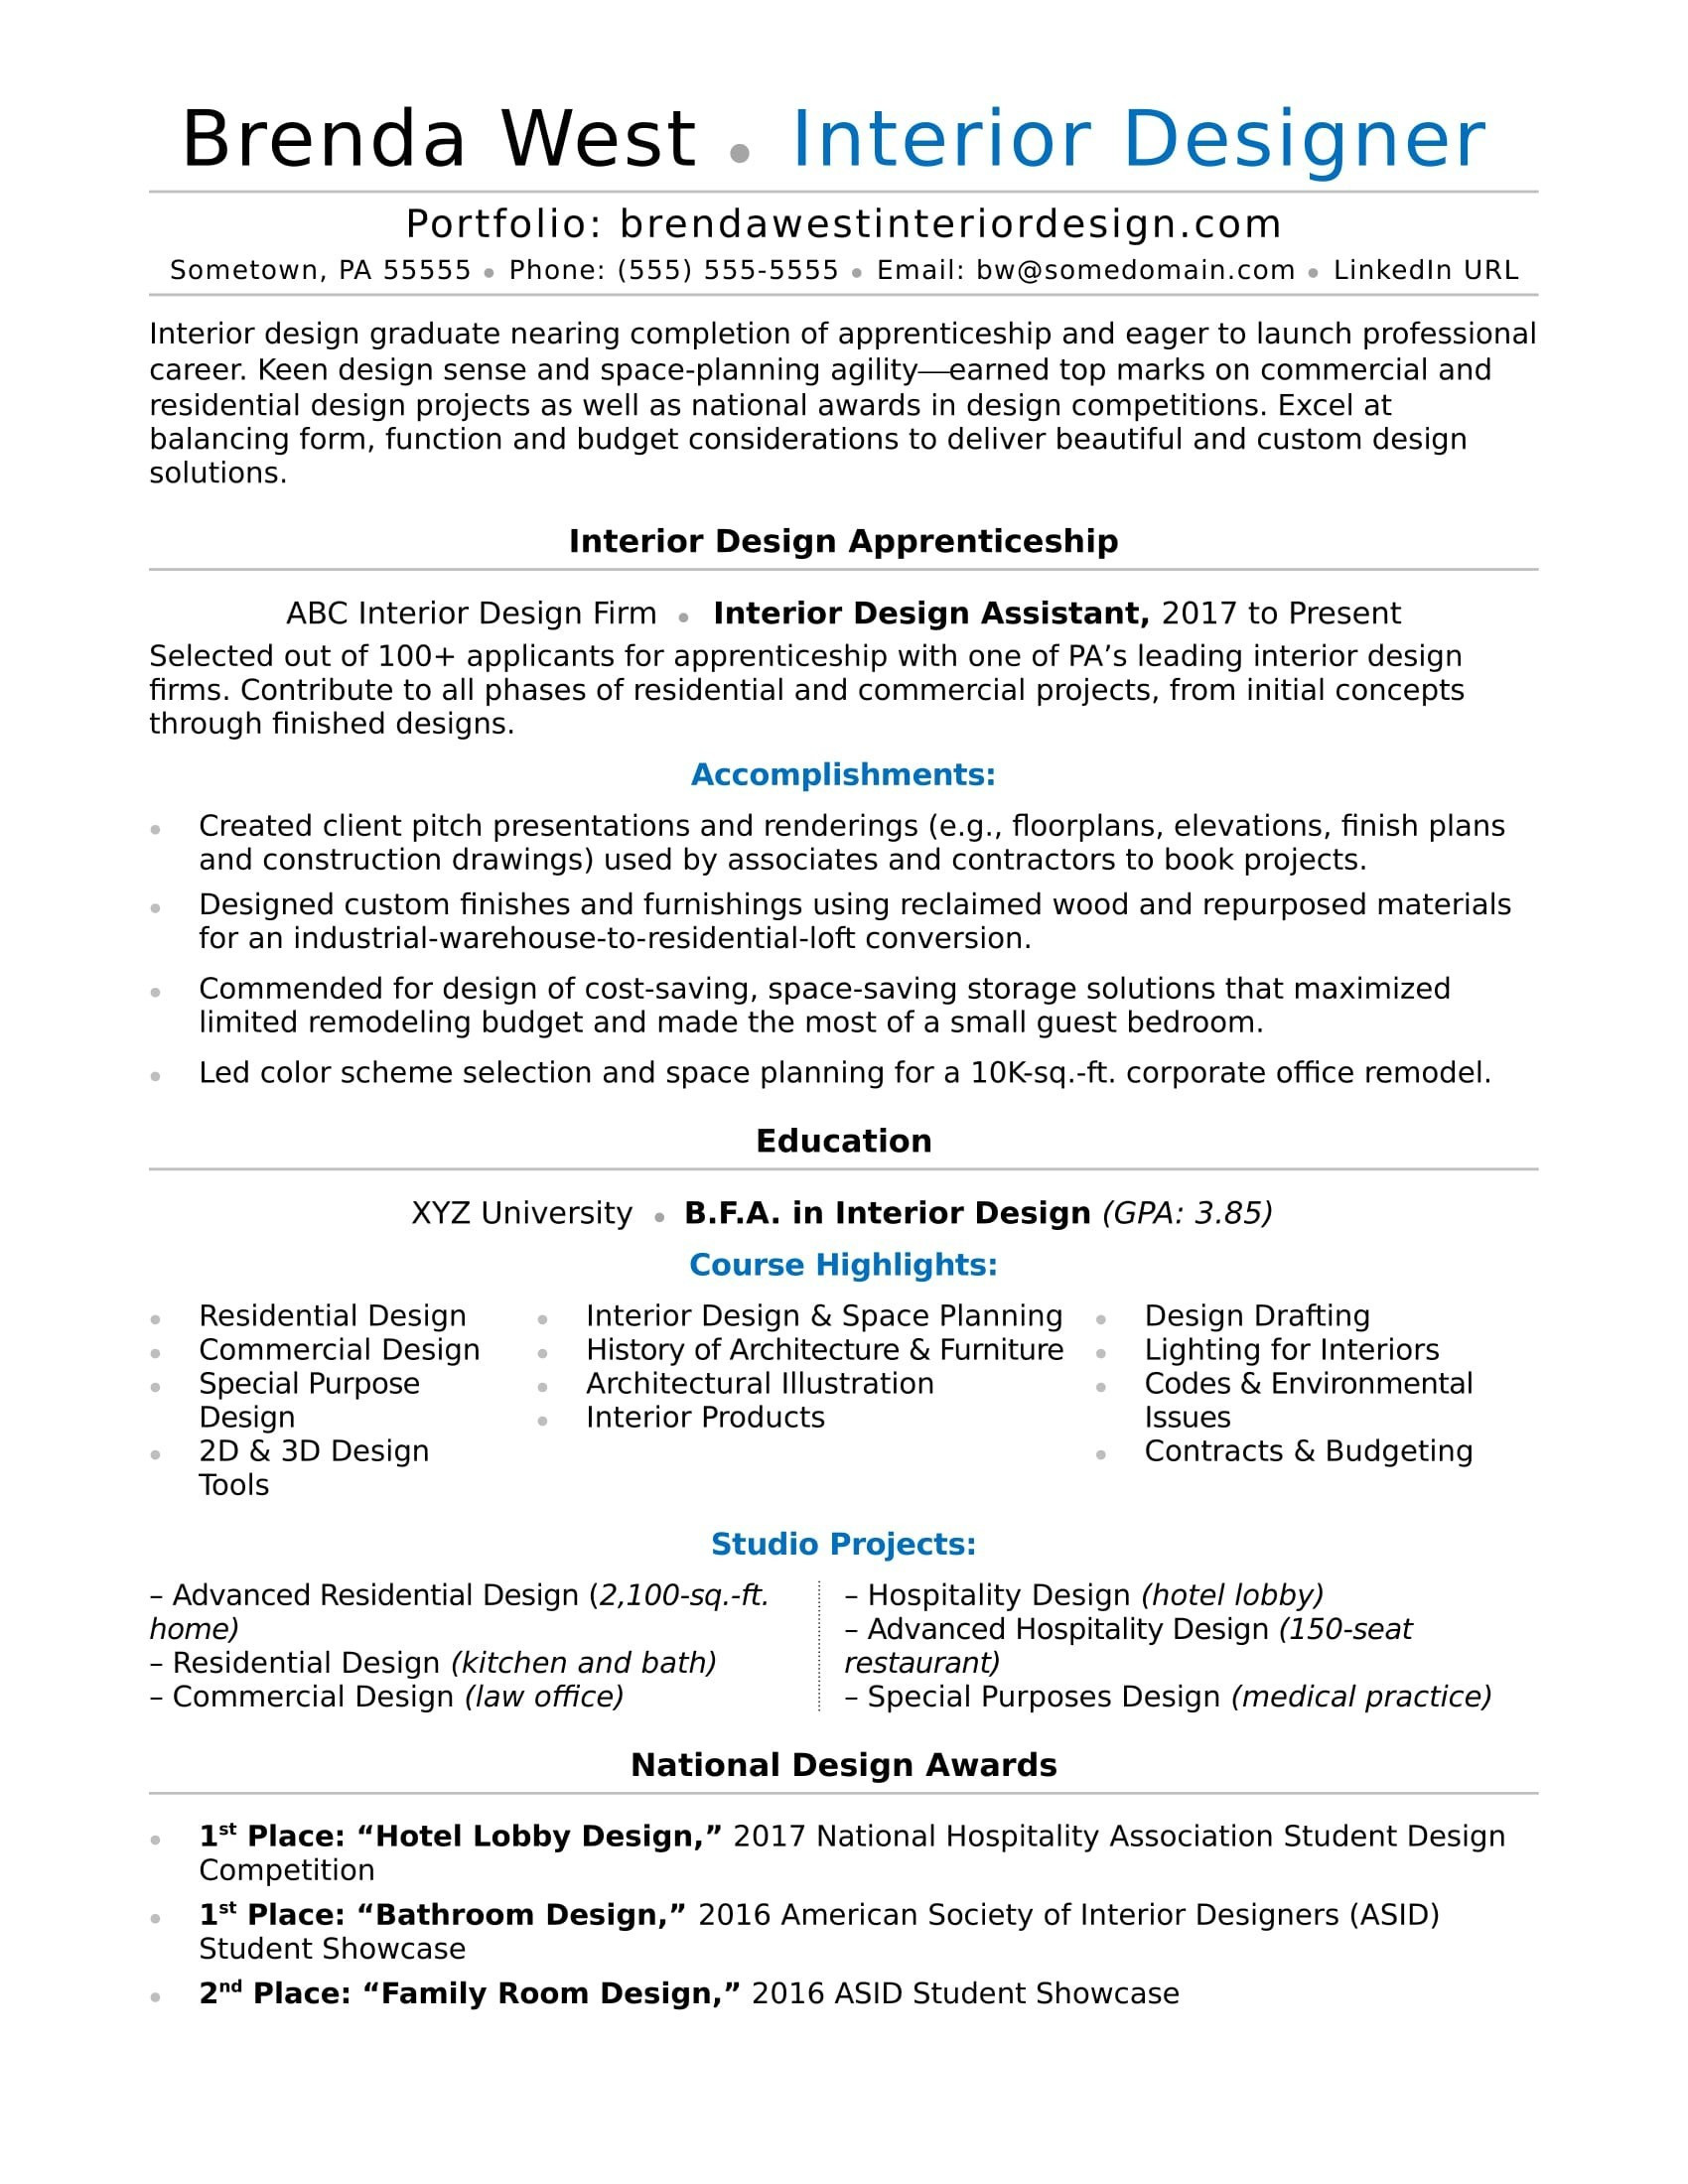 Federal Resume Template 2016 Resume Templates Free Sample Great Resume Templates Luxury Inspirational Free Templates Best Of 2016 Resume Templates Free federal resume template|wikiresume.com